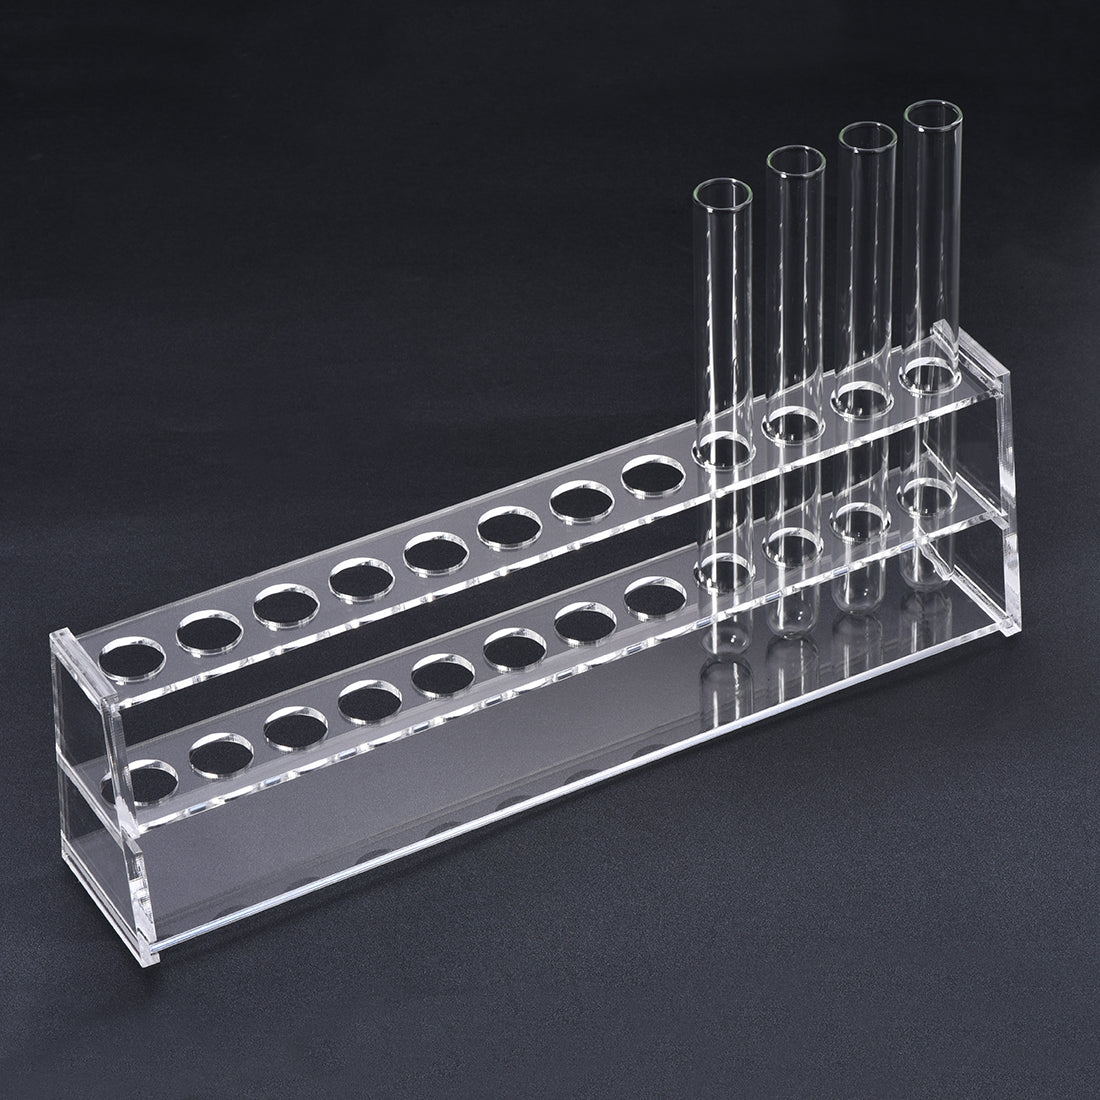 uxcell Uxcell Acrylic Test Tube Holder Rack 12 Wells for 10ml Centrifuge Tubes Clear